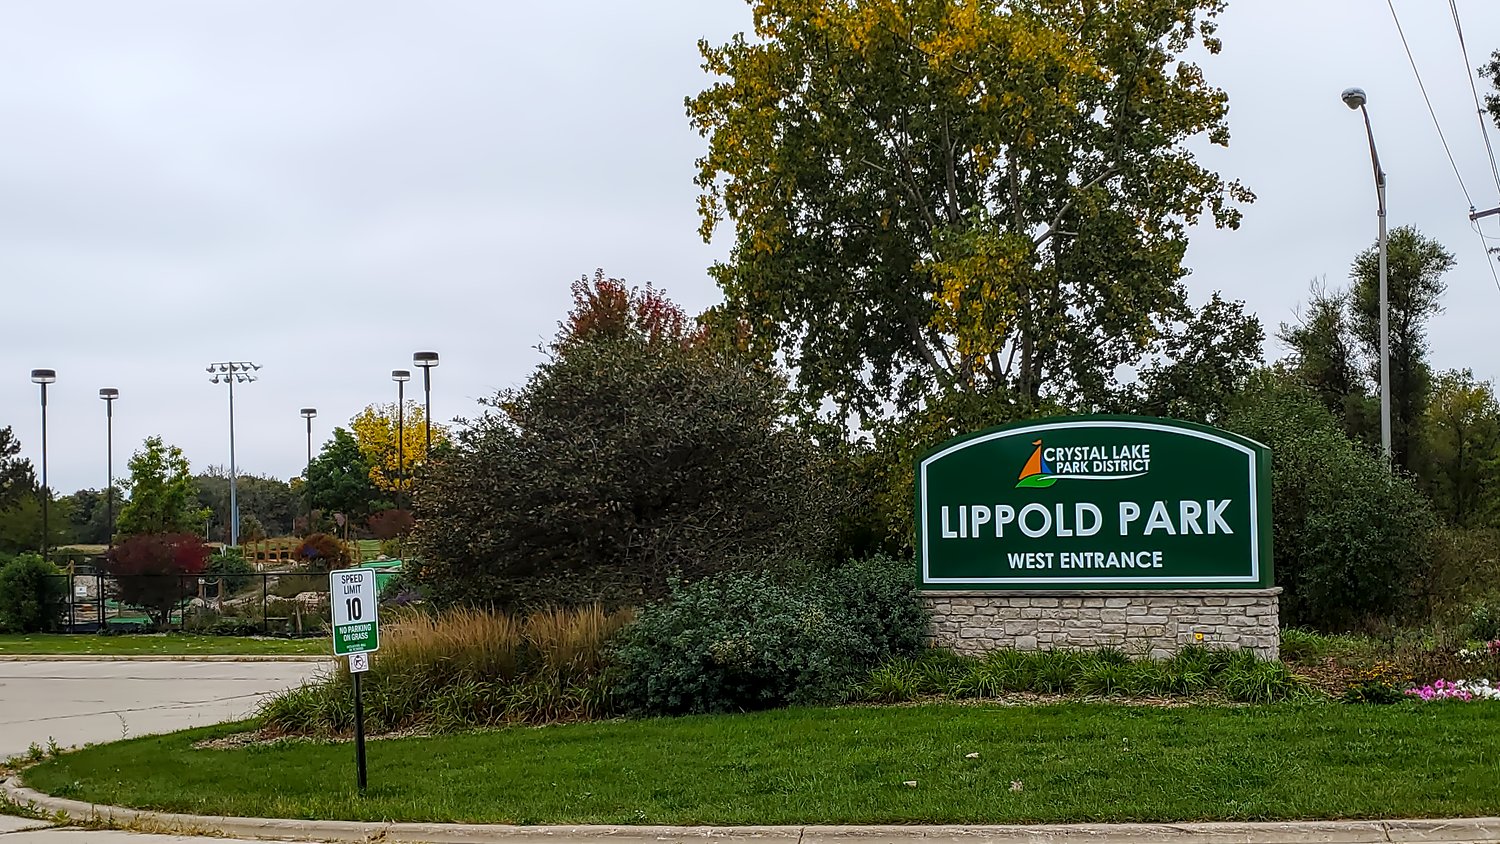 Lippold Park, west entrance and miniature golf course.